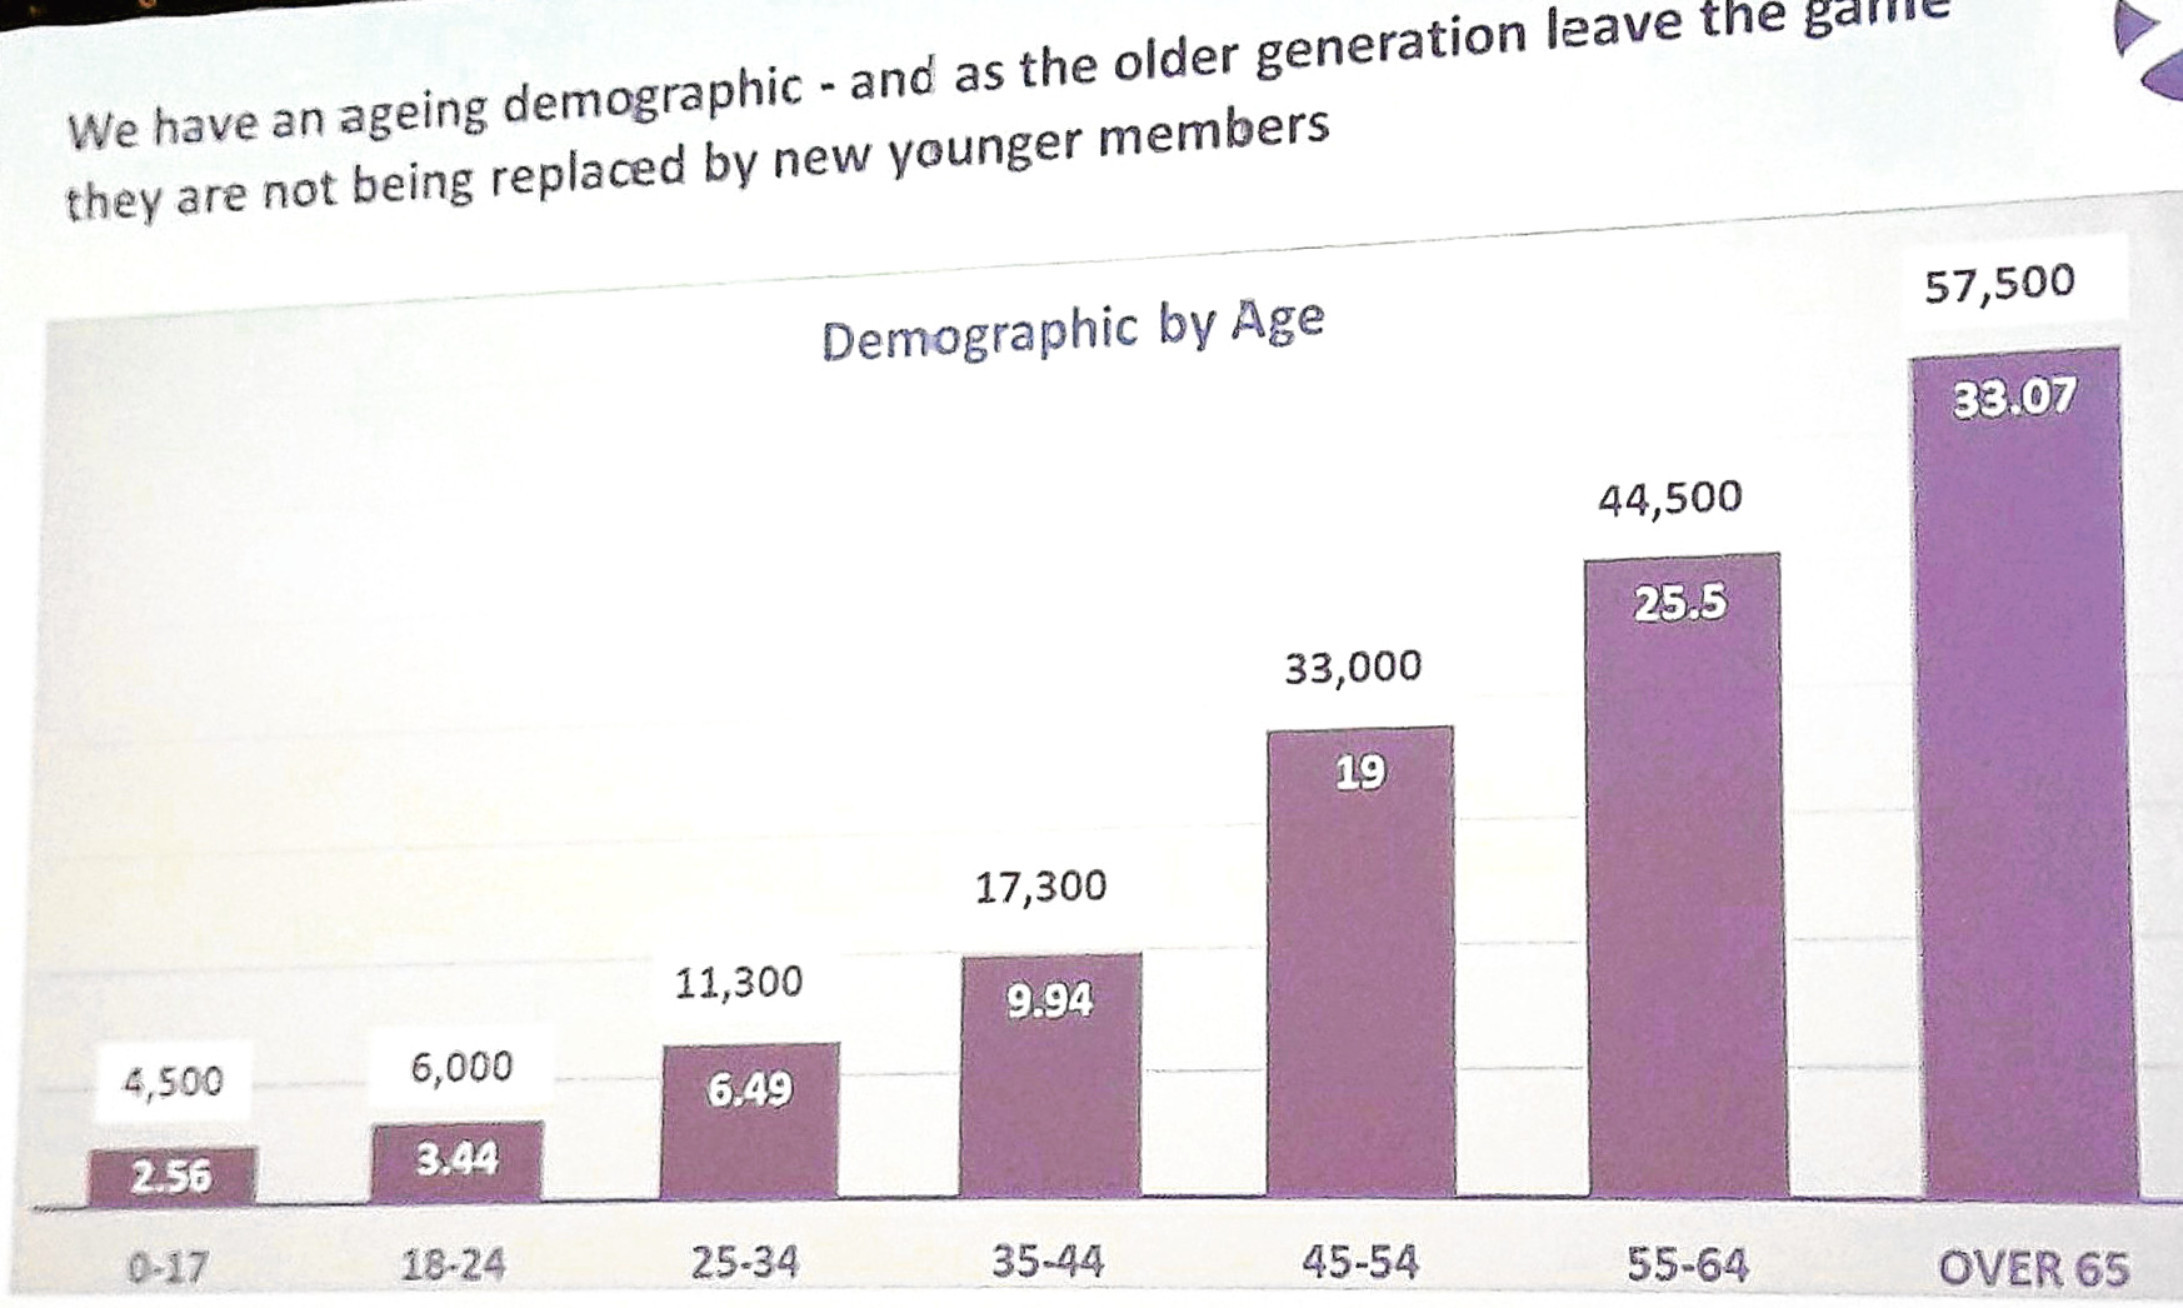 Stewart Darling's illustration  of the age demographic facing Scottish golf clubs as shown to the Future of Golf conference.